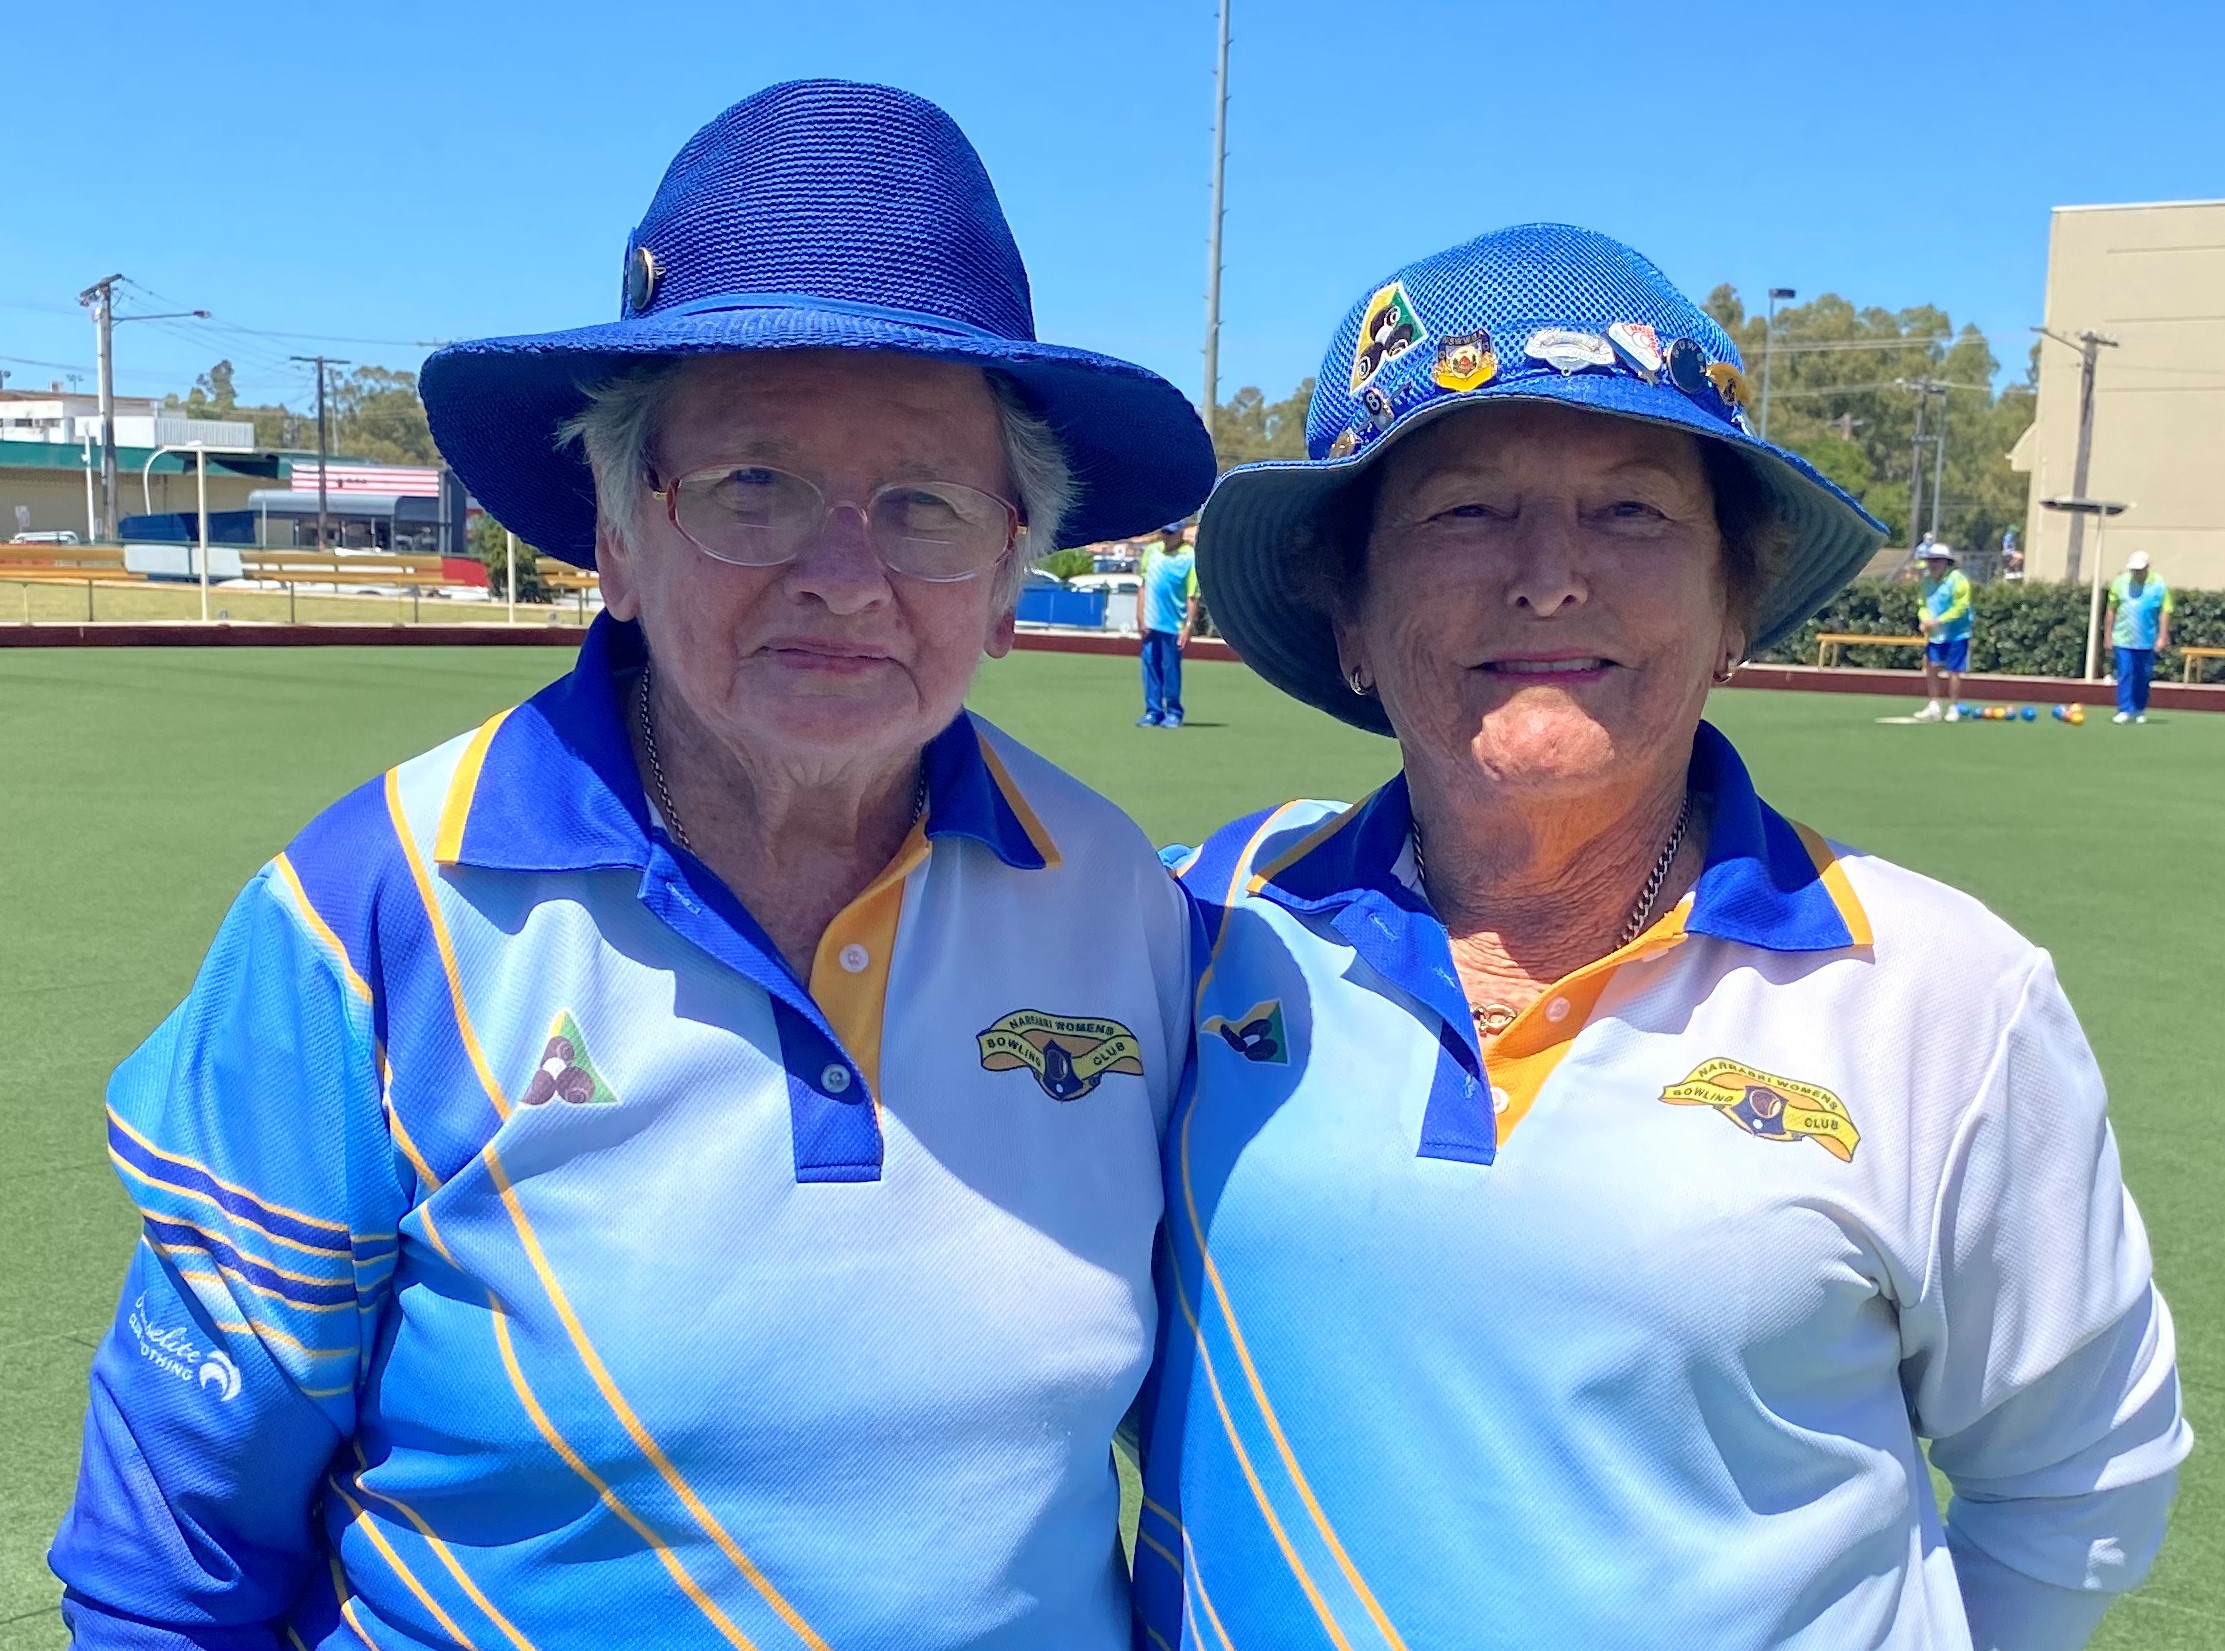 Dawn Armstrong and Jan Etheridge win the ladies’ President Pairs final